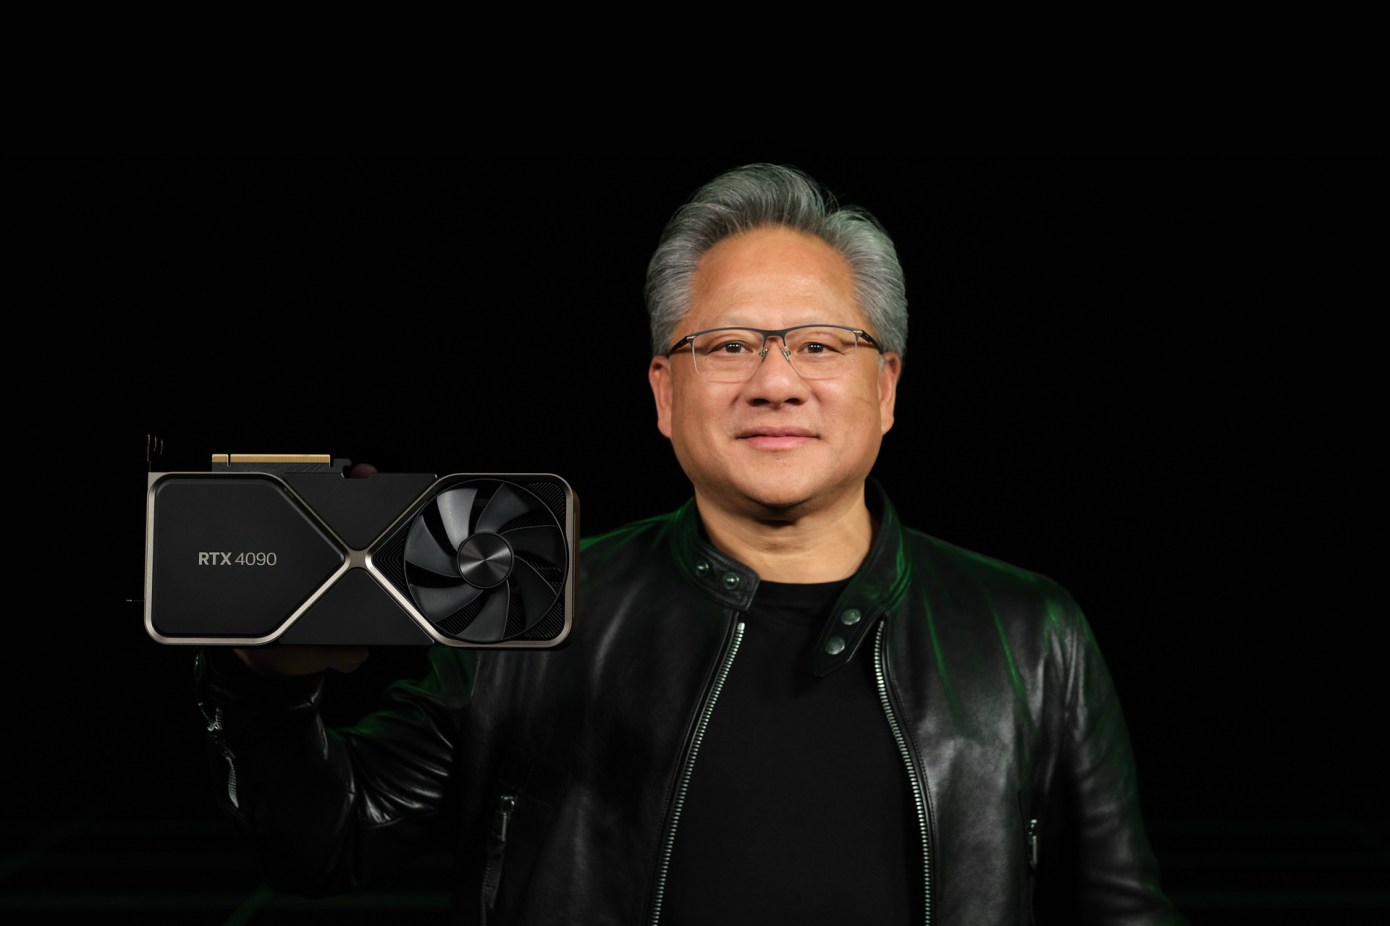 nvidia-ceo-jensen-huang-with-geforce-rtx-4090.jpg